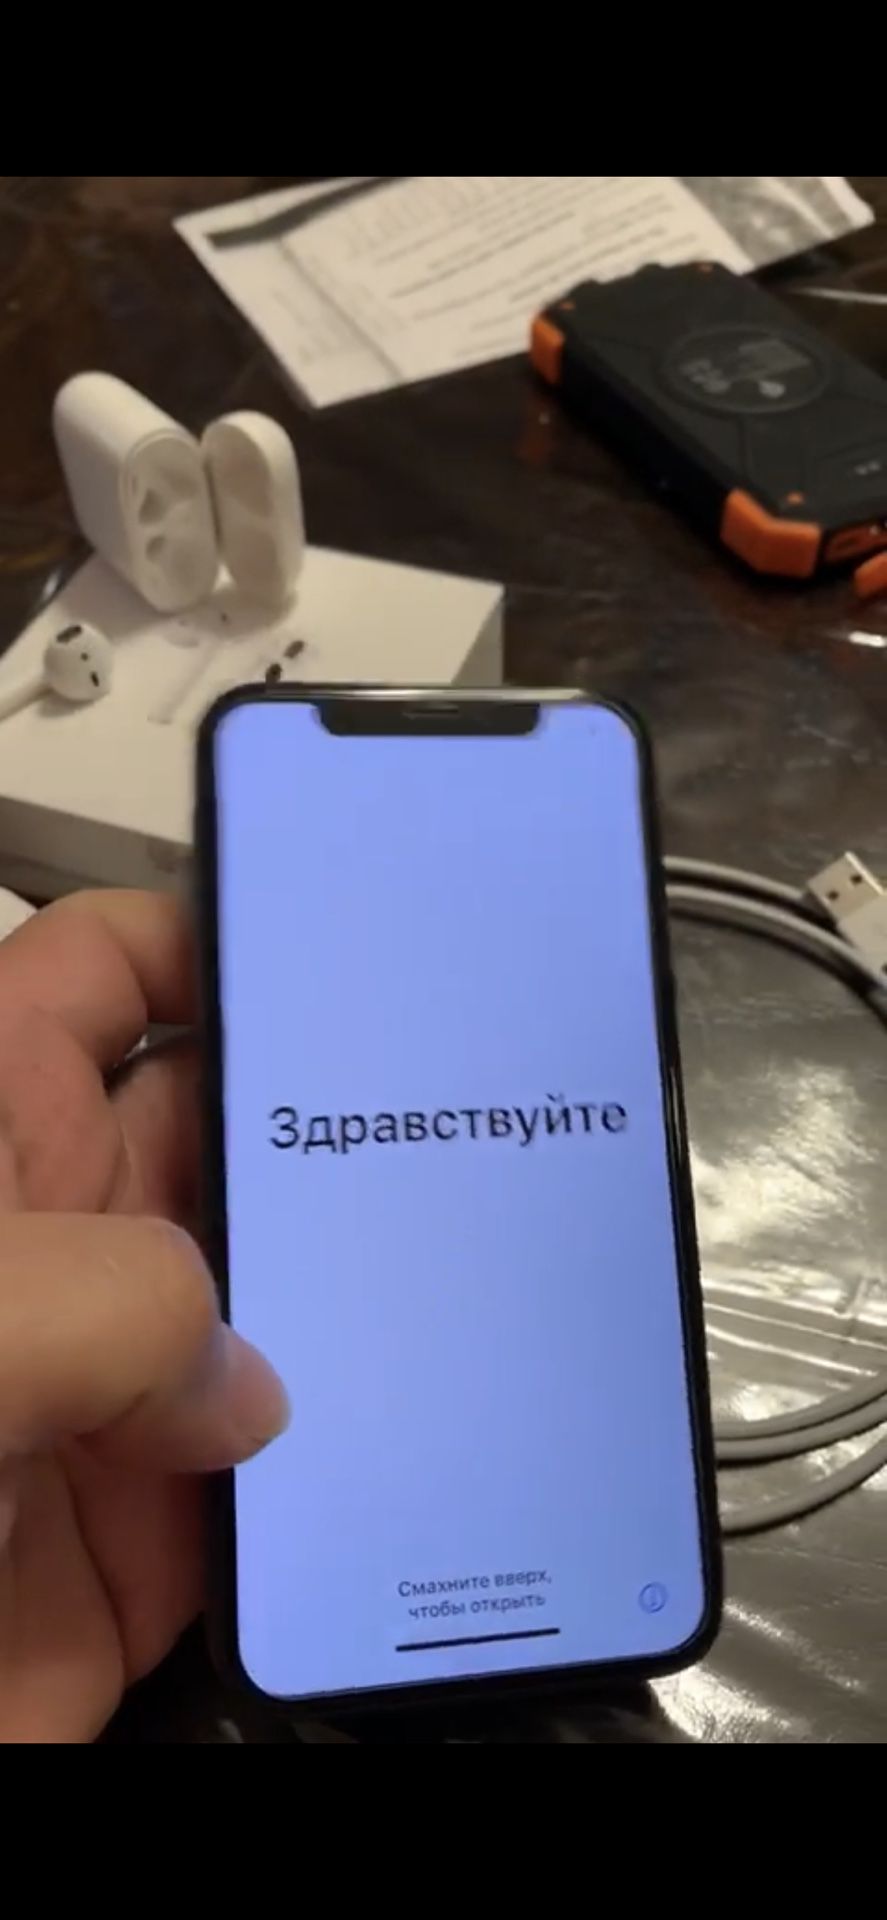 Iphone X 256g trade for 125cc bike